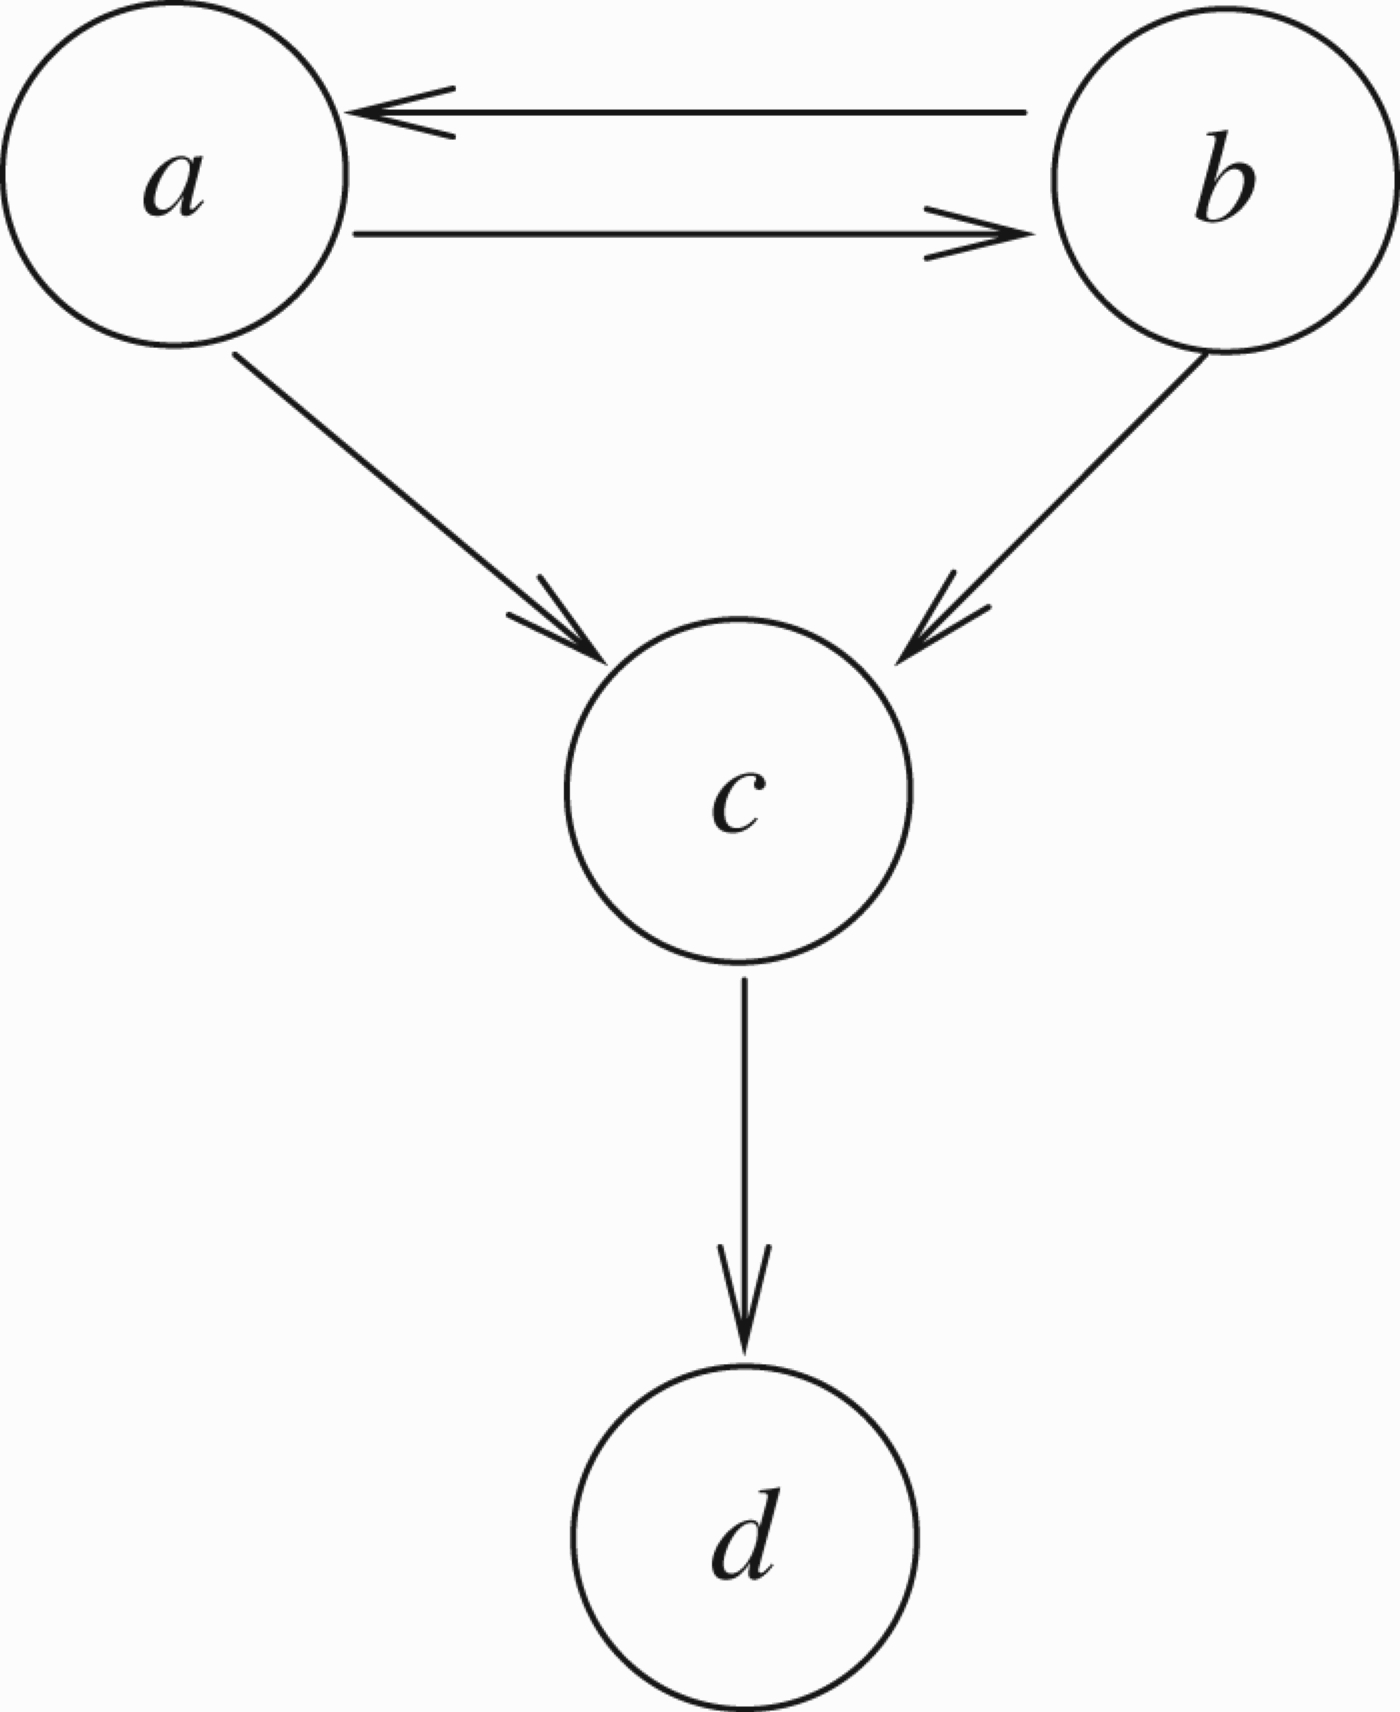 Example of network.